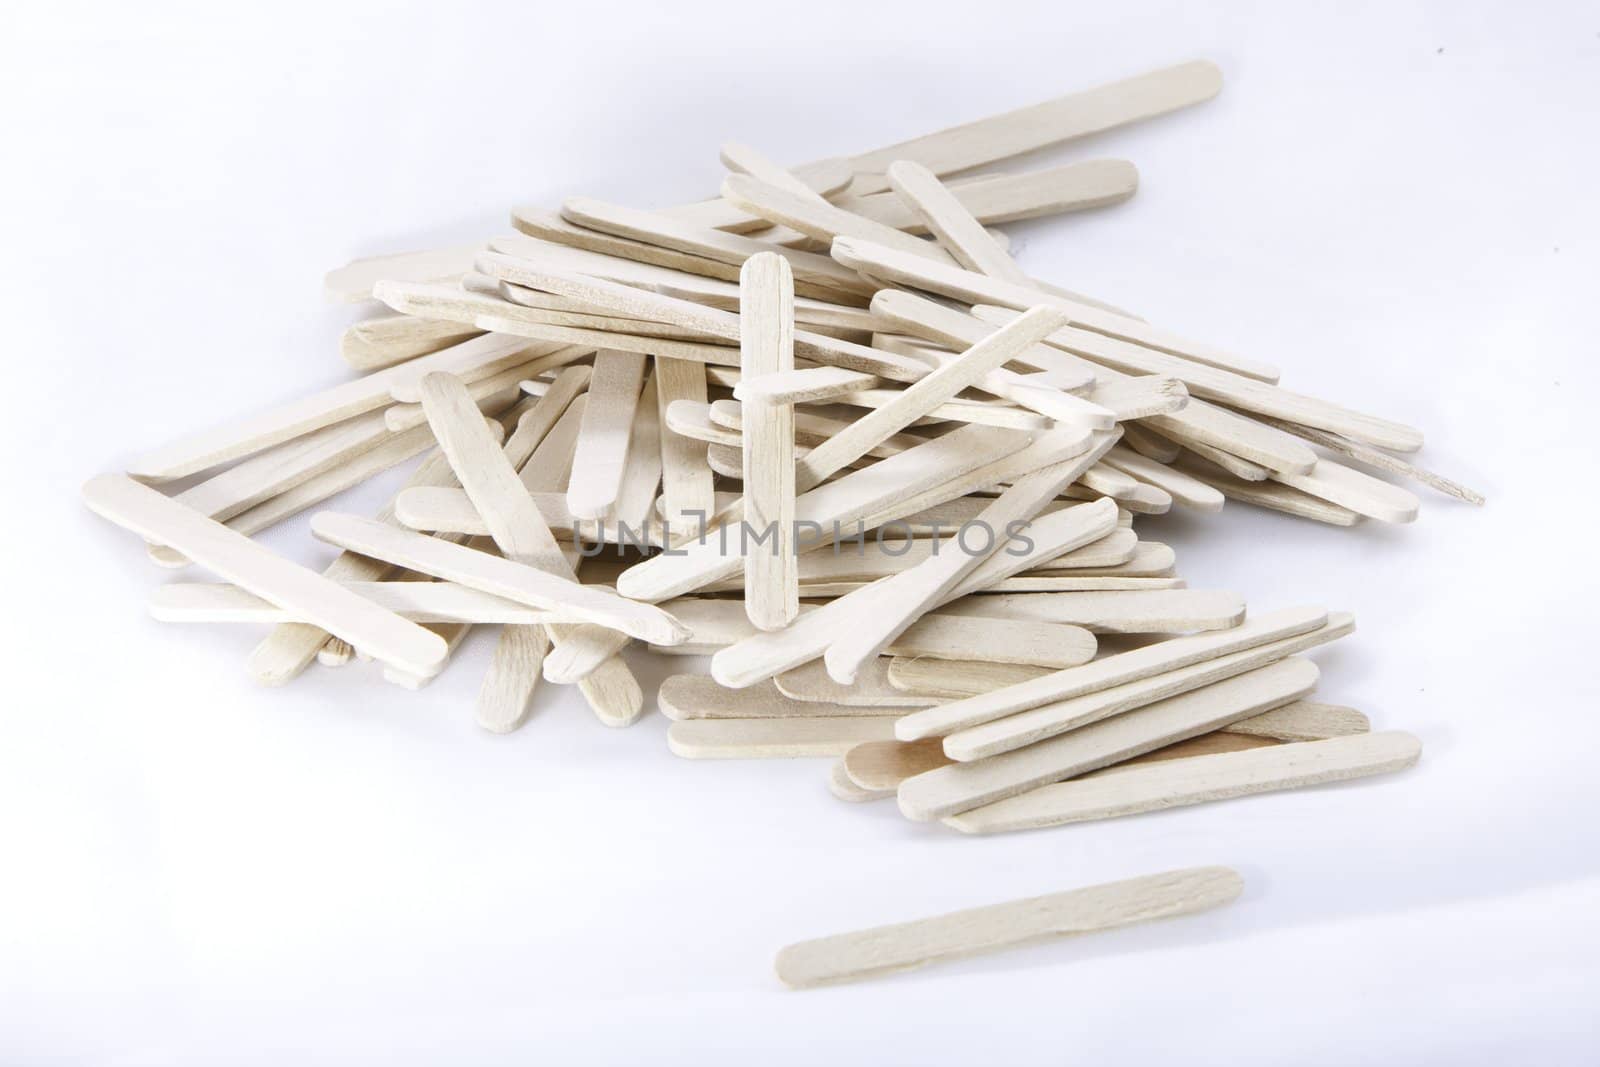 a bunch of wooden icecream sticks lying unarranged on a white surface